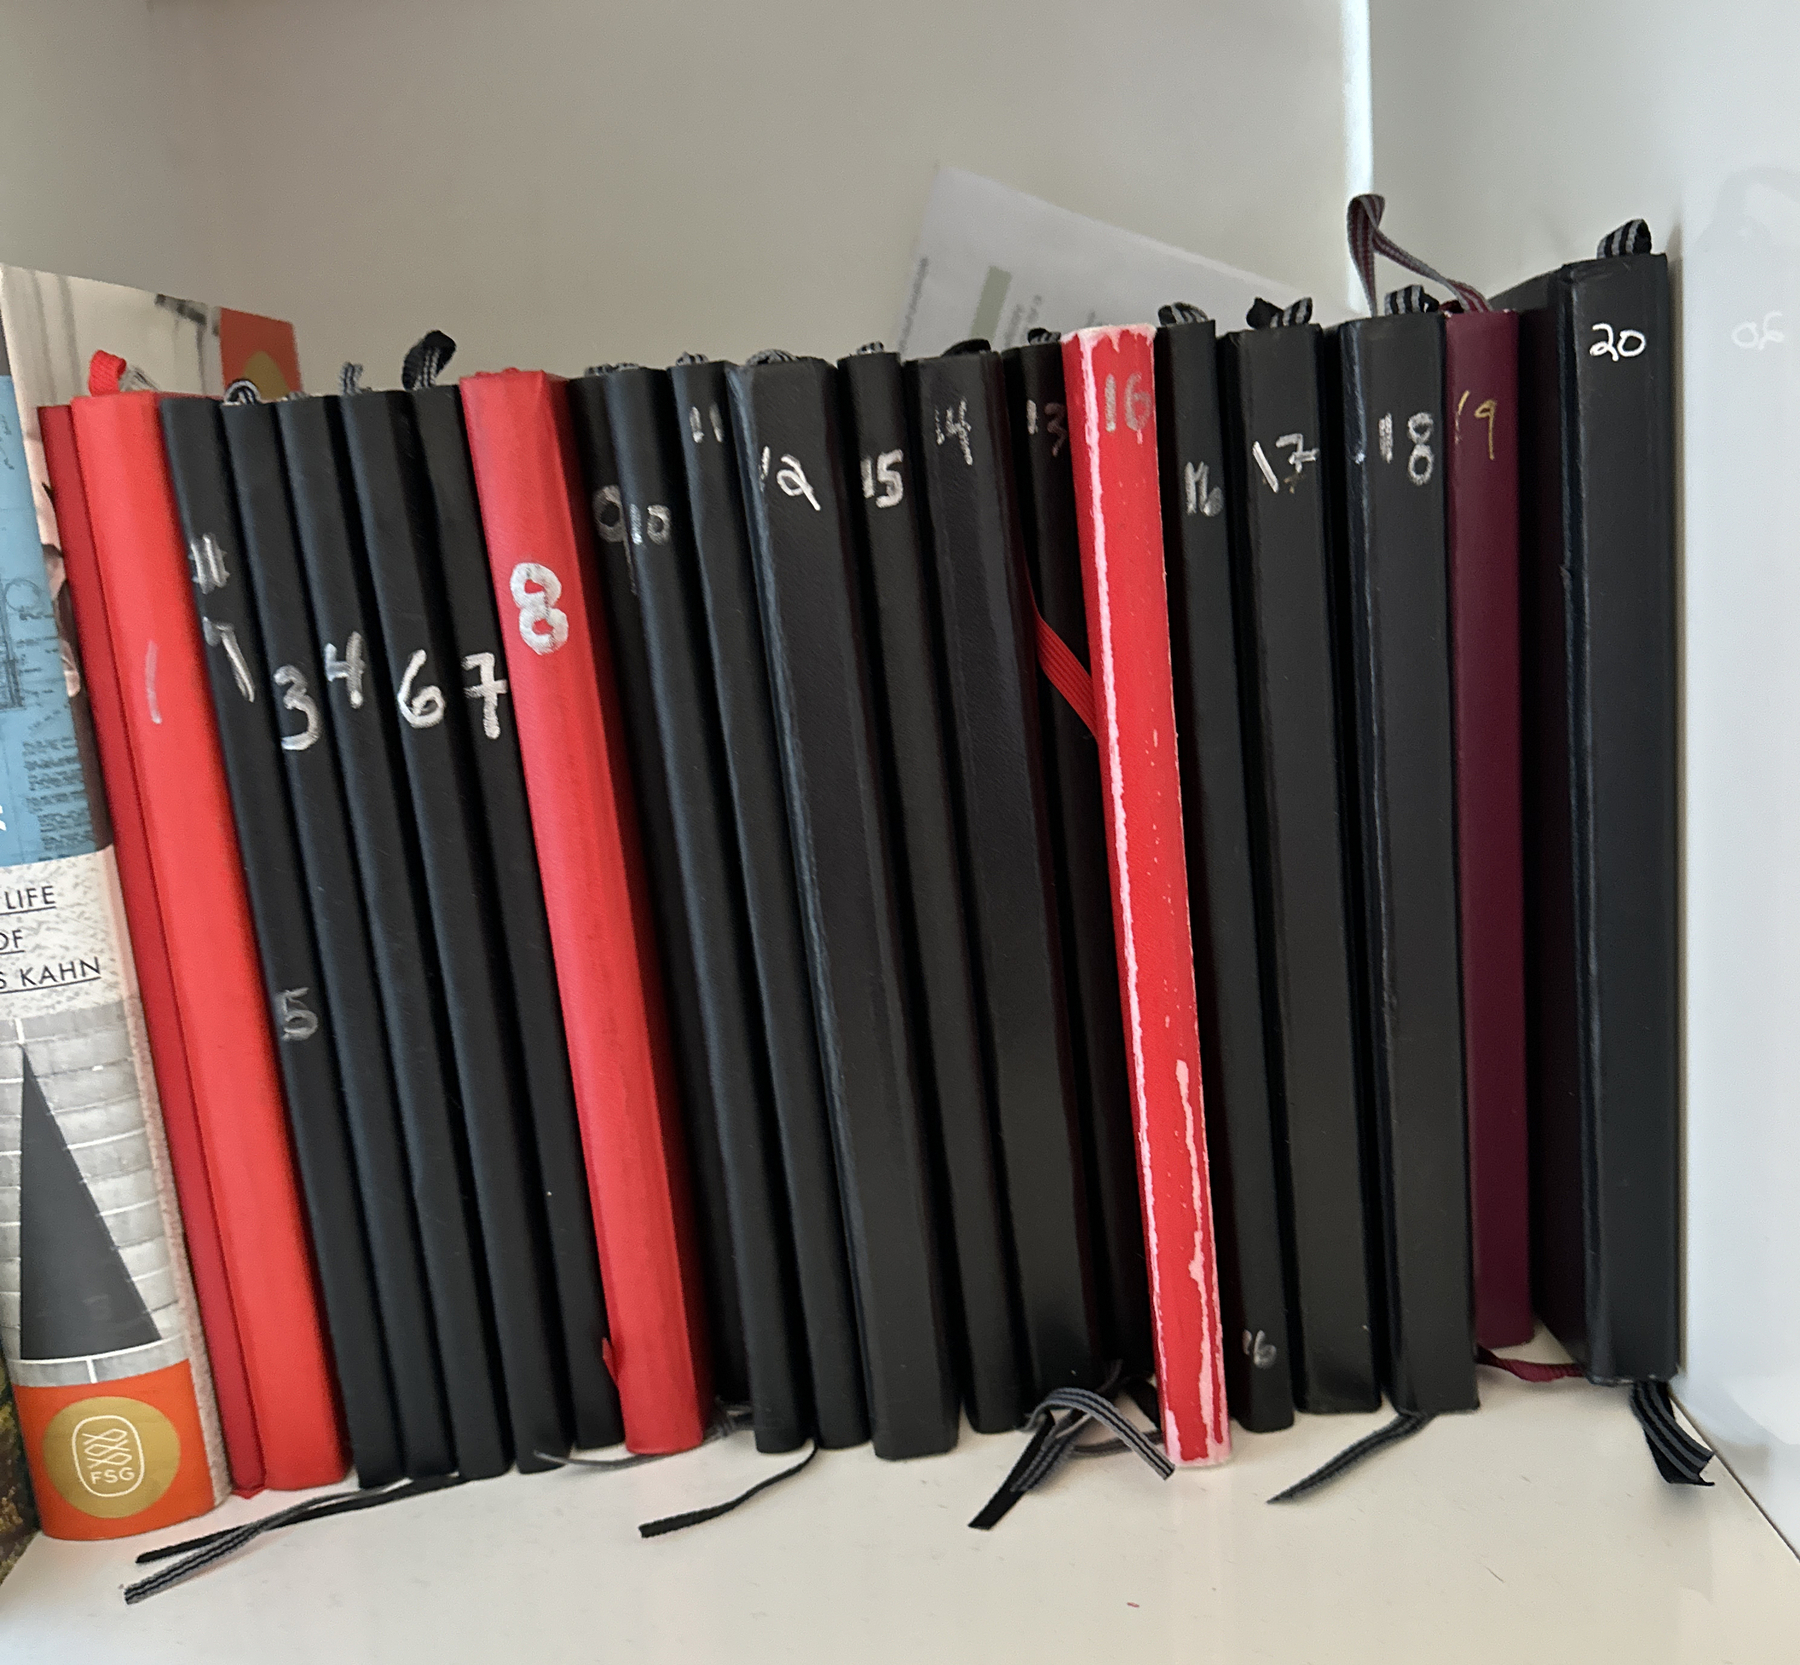 A row of mostly black and some red notebooks on a bookshelf. Each notebook spine is numbered.